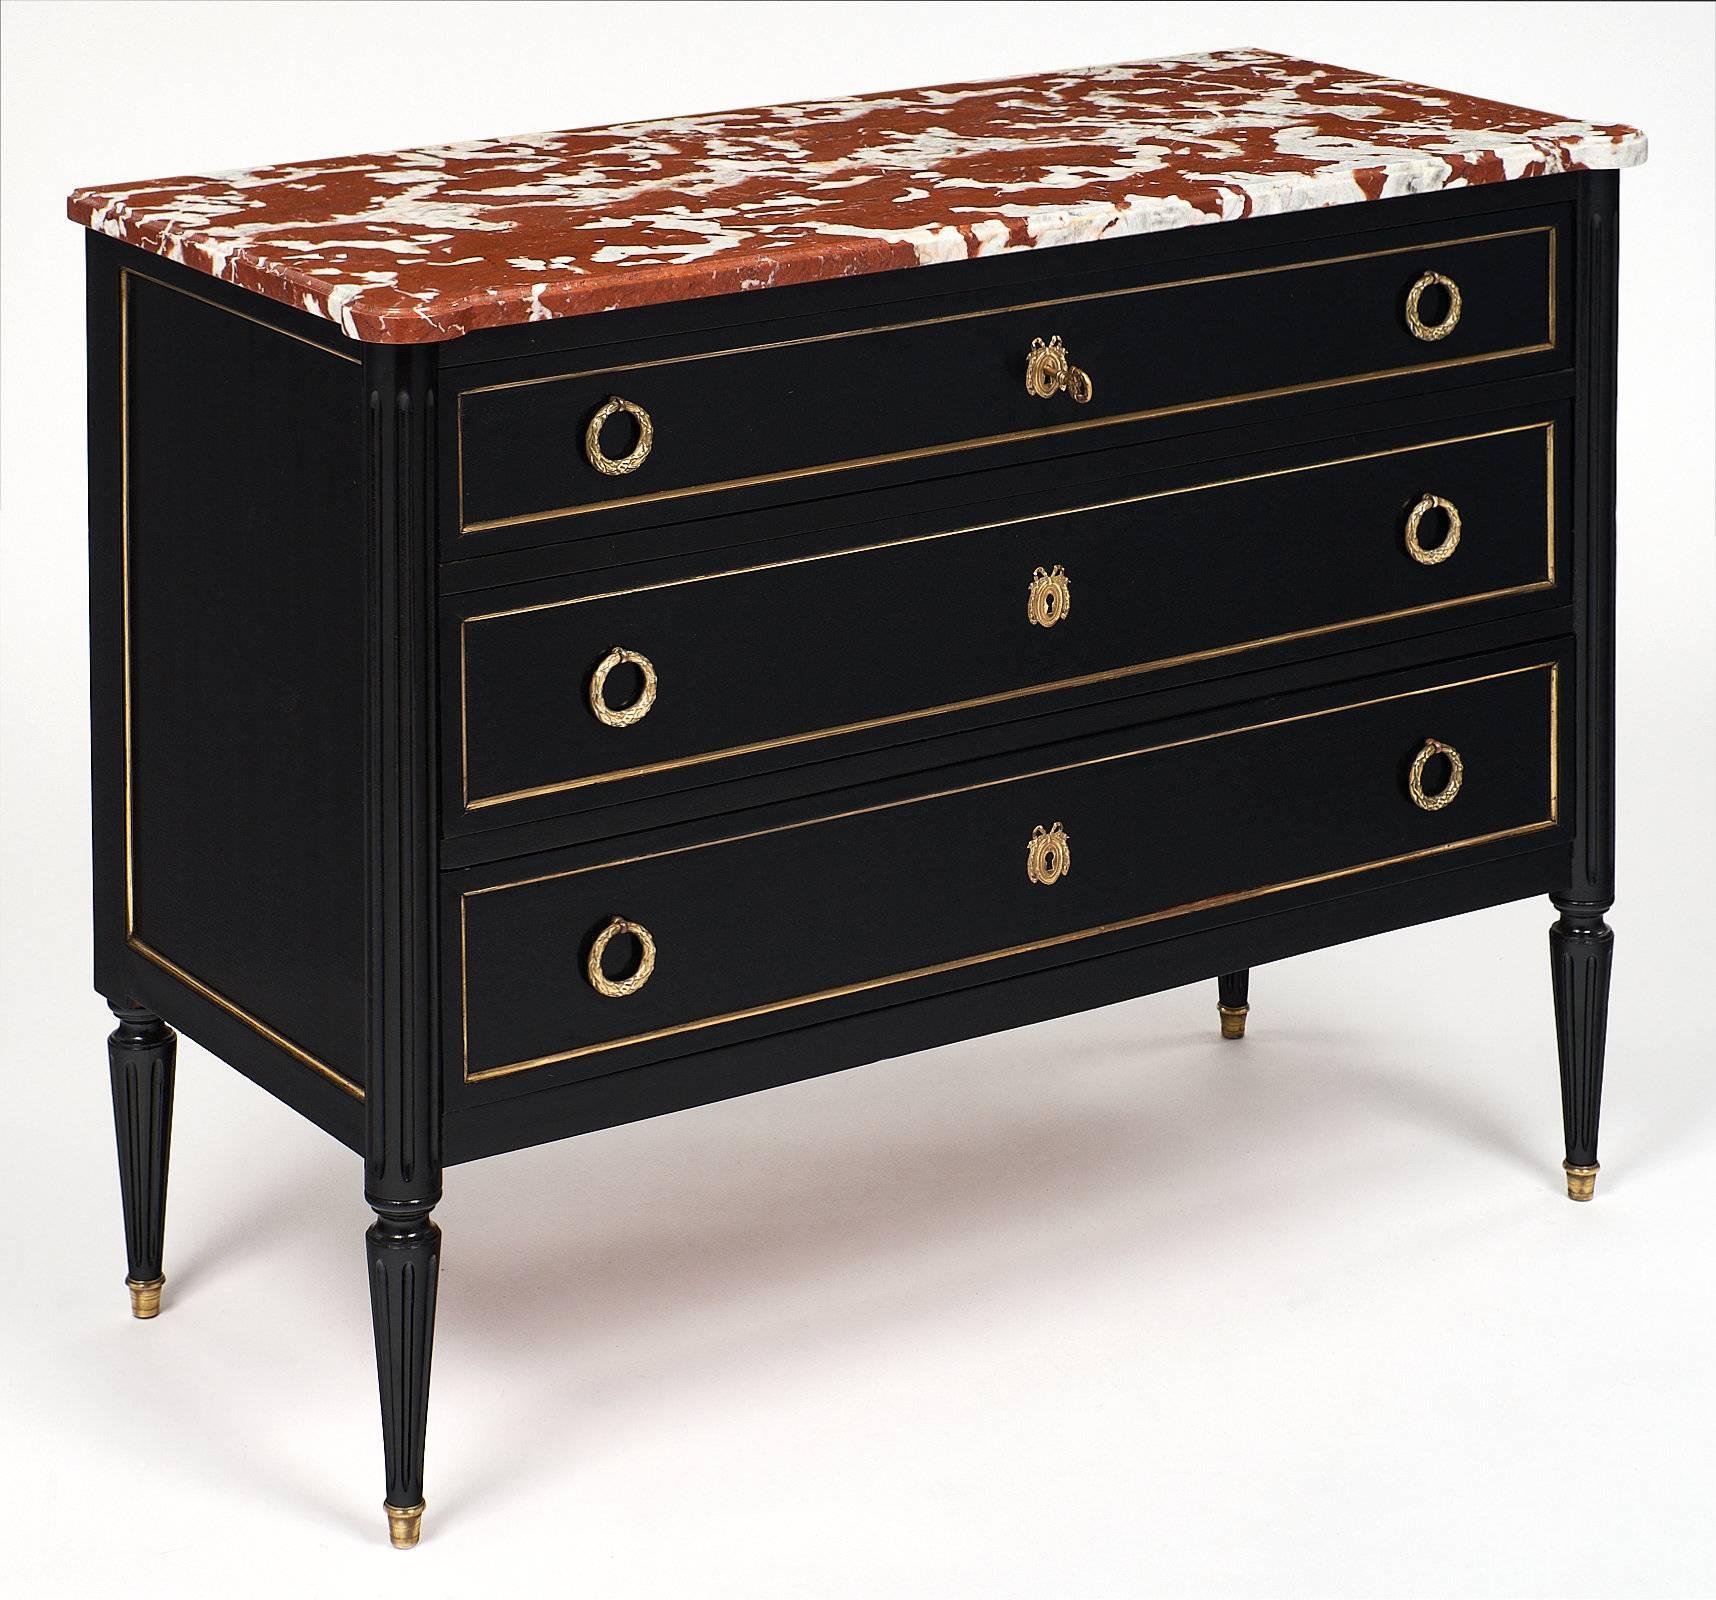 This French antique Louis XVI style chest boasts a unique red marble “rouge royal” top with striking white veining. The trim on both sides and around all three drawers, the stylized pull handles, and the ribbon escutcheons with working keys are all